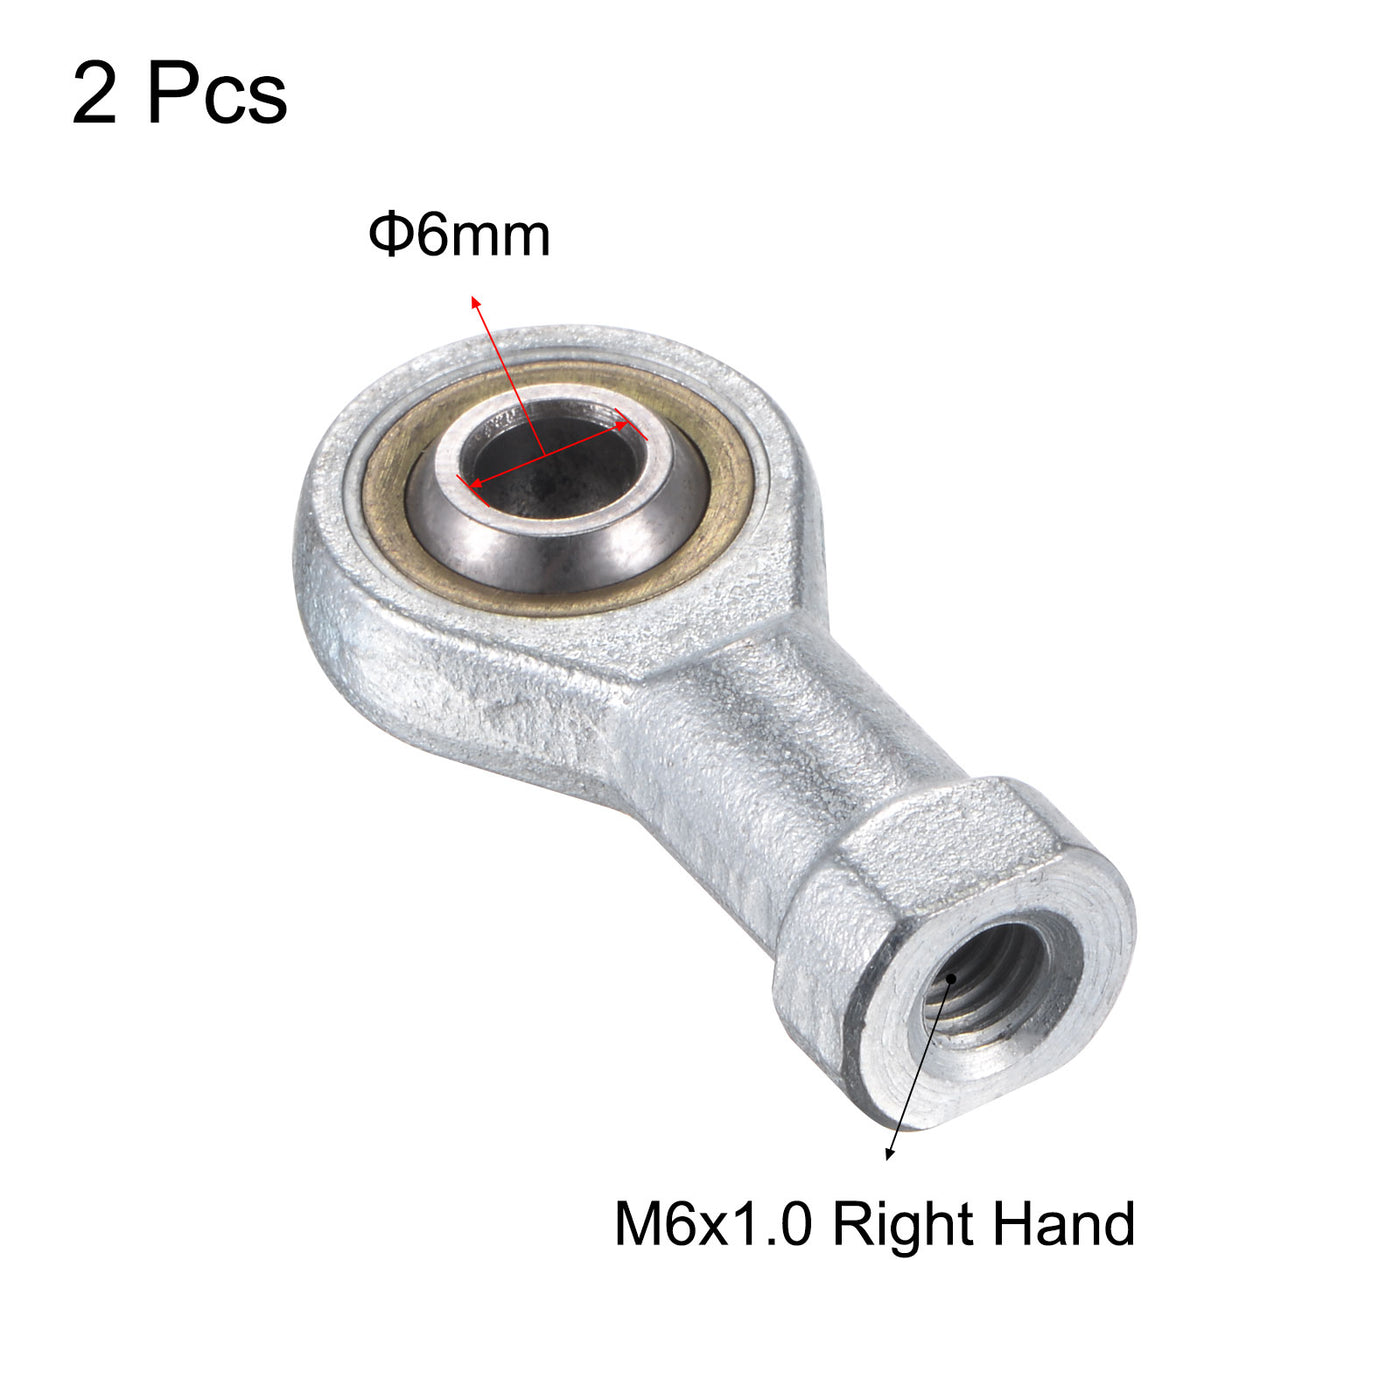 uxcell Uxcell 2pcs SI6TK PHSA6 Rod End Bearing 6mm Bore M6x1.0 Right Hand Female Thread